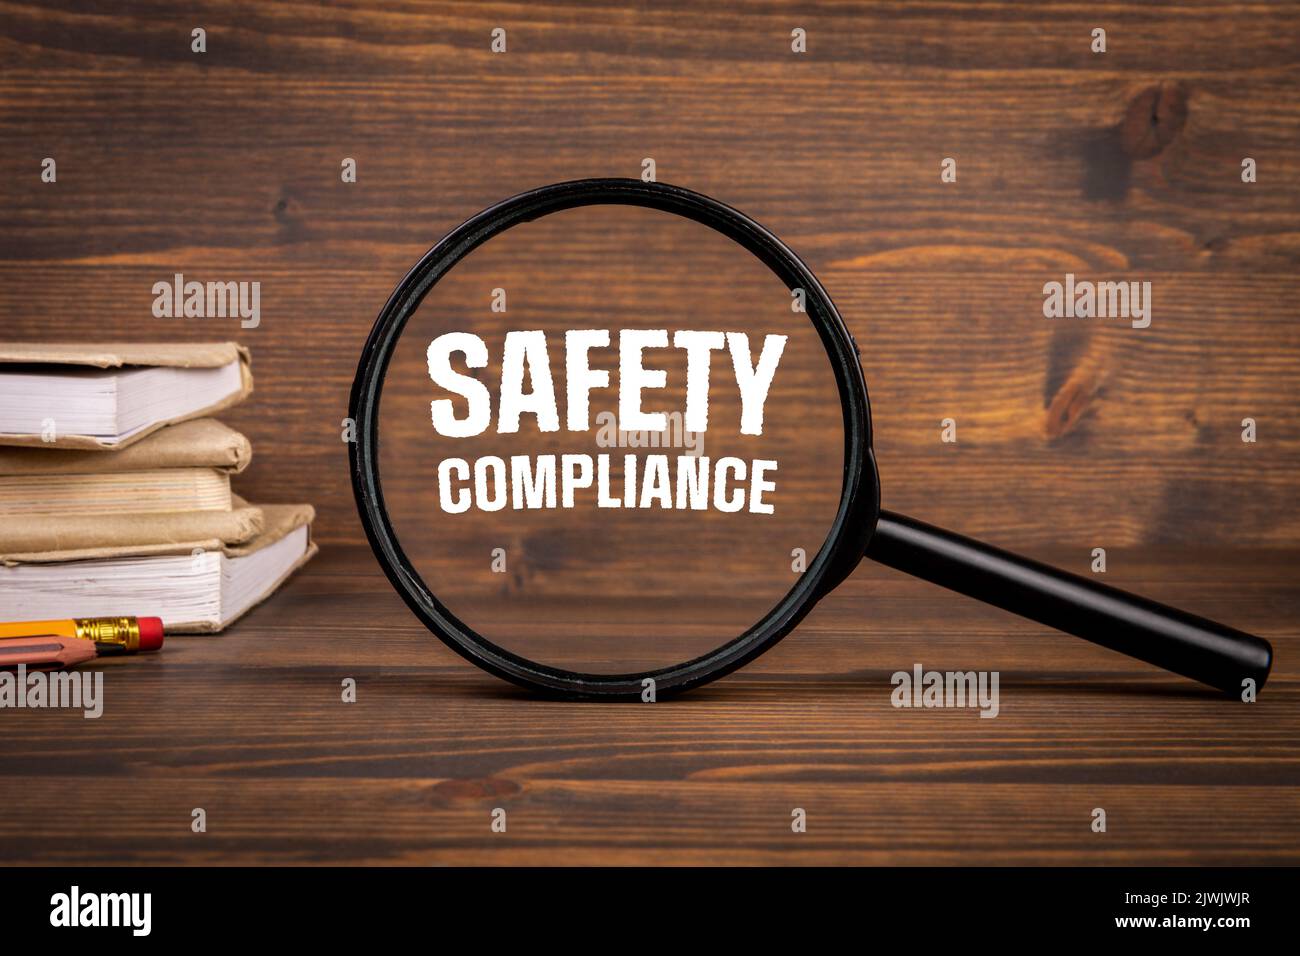 SAFETY COMPLIANCE concept. Magnifying glass on a dark wooden background. Stock Photo